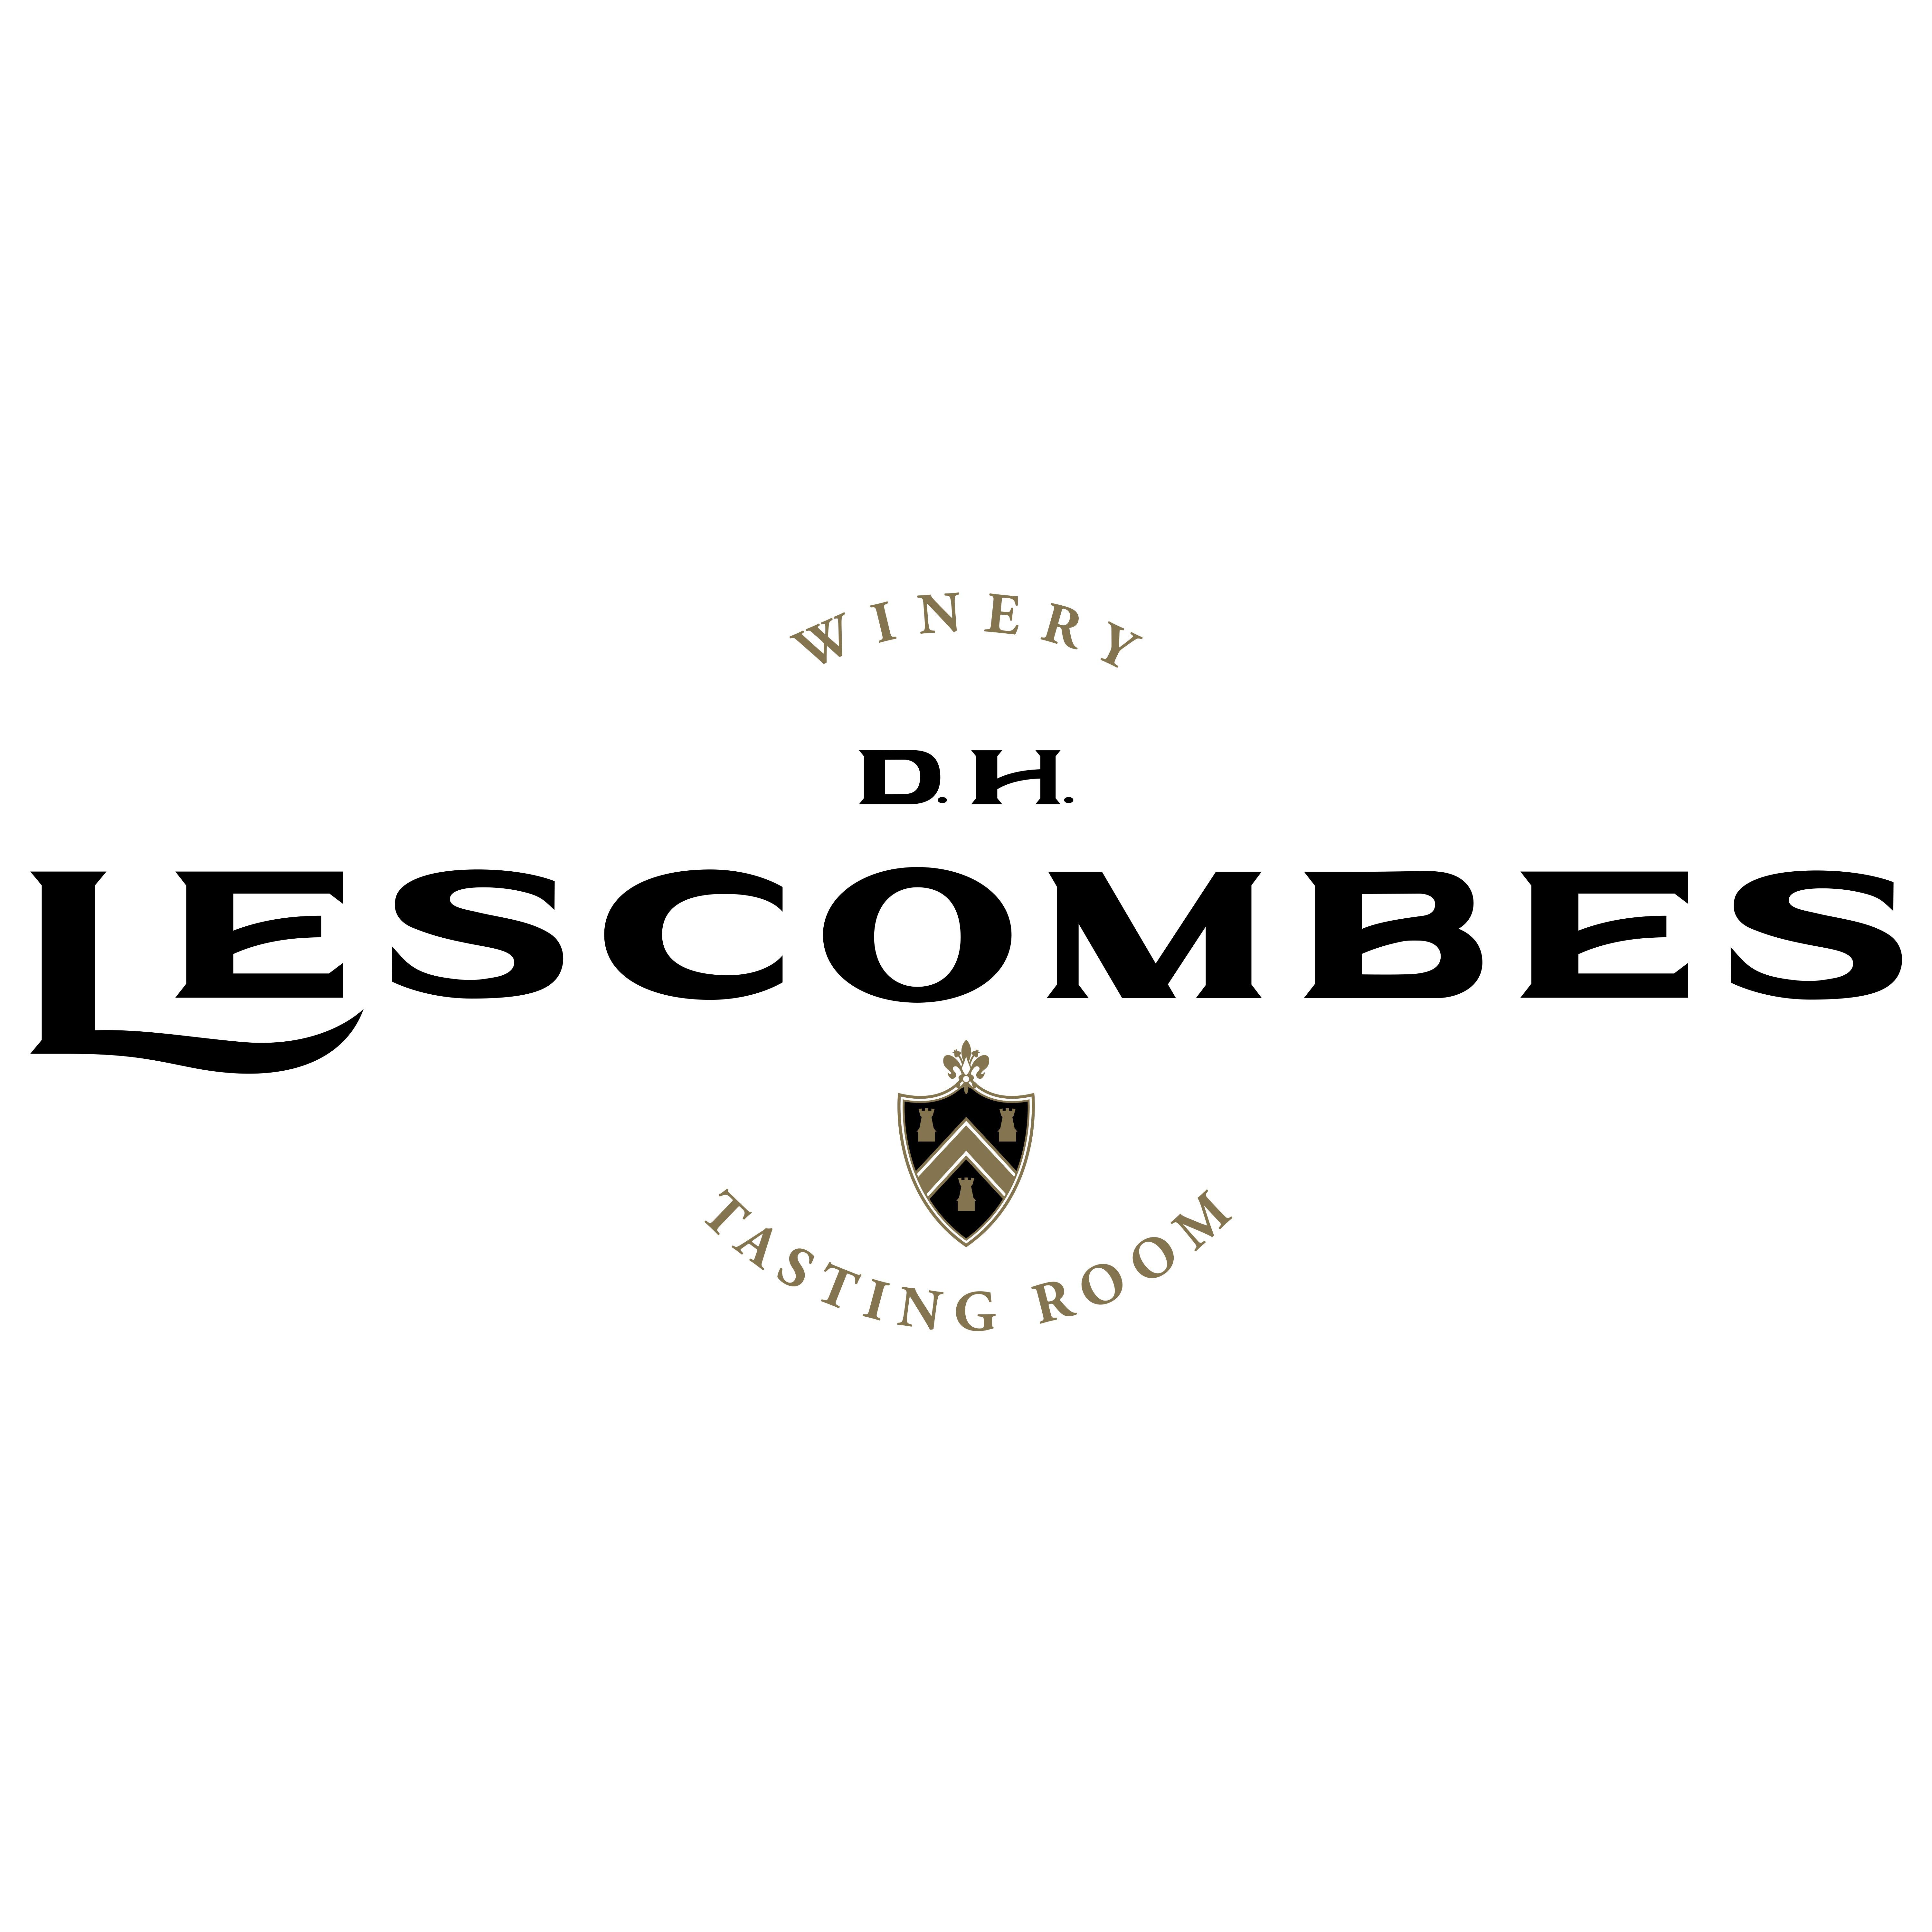 D.H. LESCOMBES WINERY & TASTING ROOM